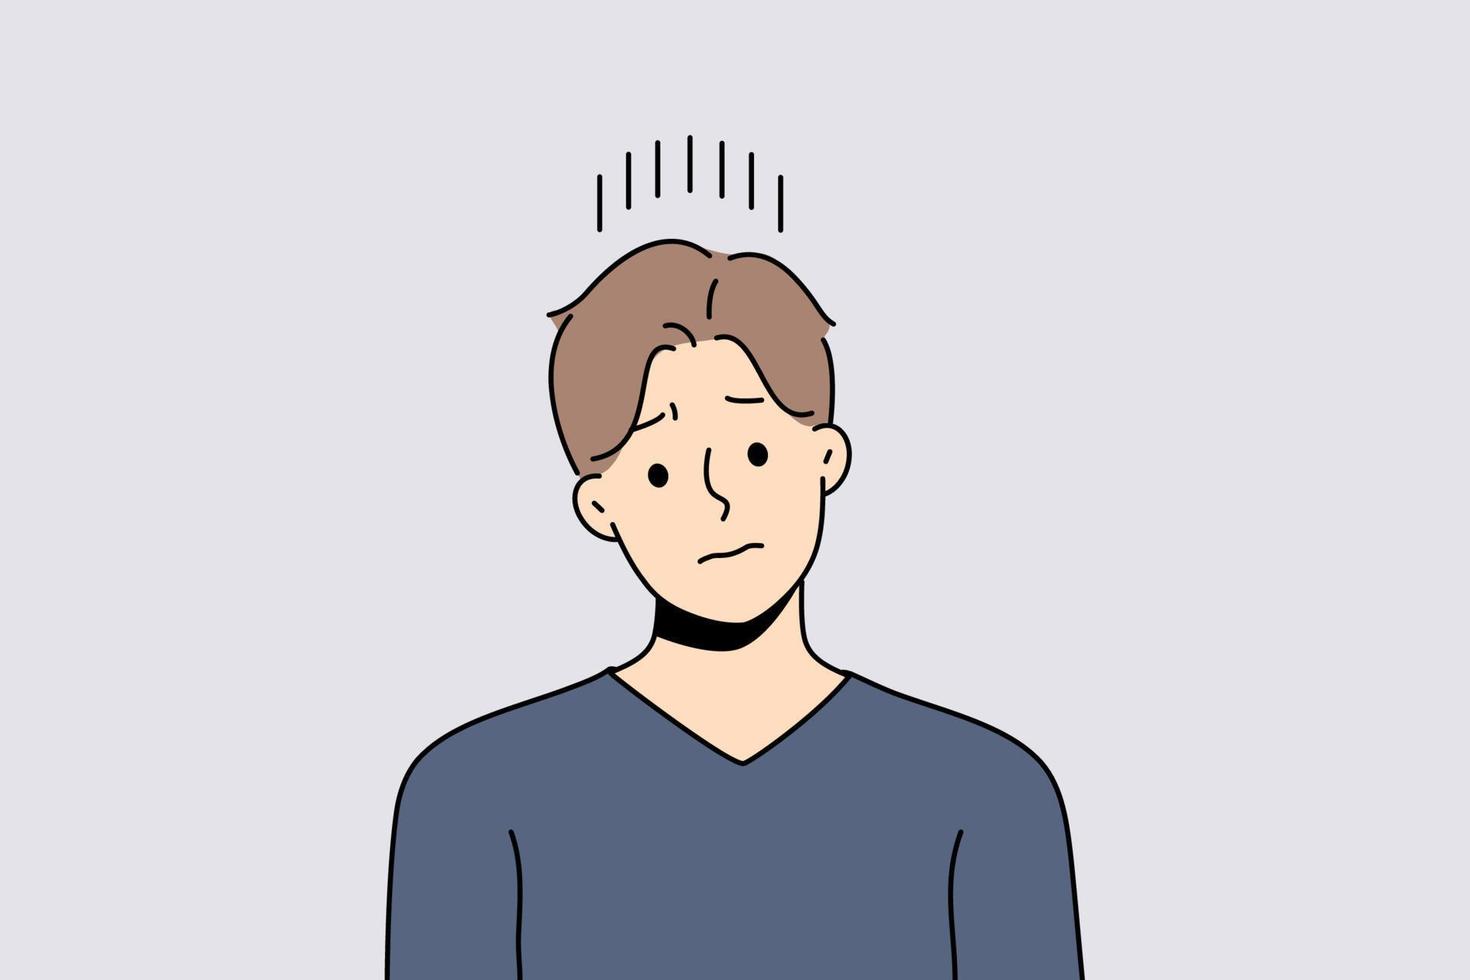 Unhappy young man suffer from repetitive thoughts in head. Upset distressed guy struggle with depression or bad mood. Vector illustration.